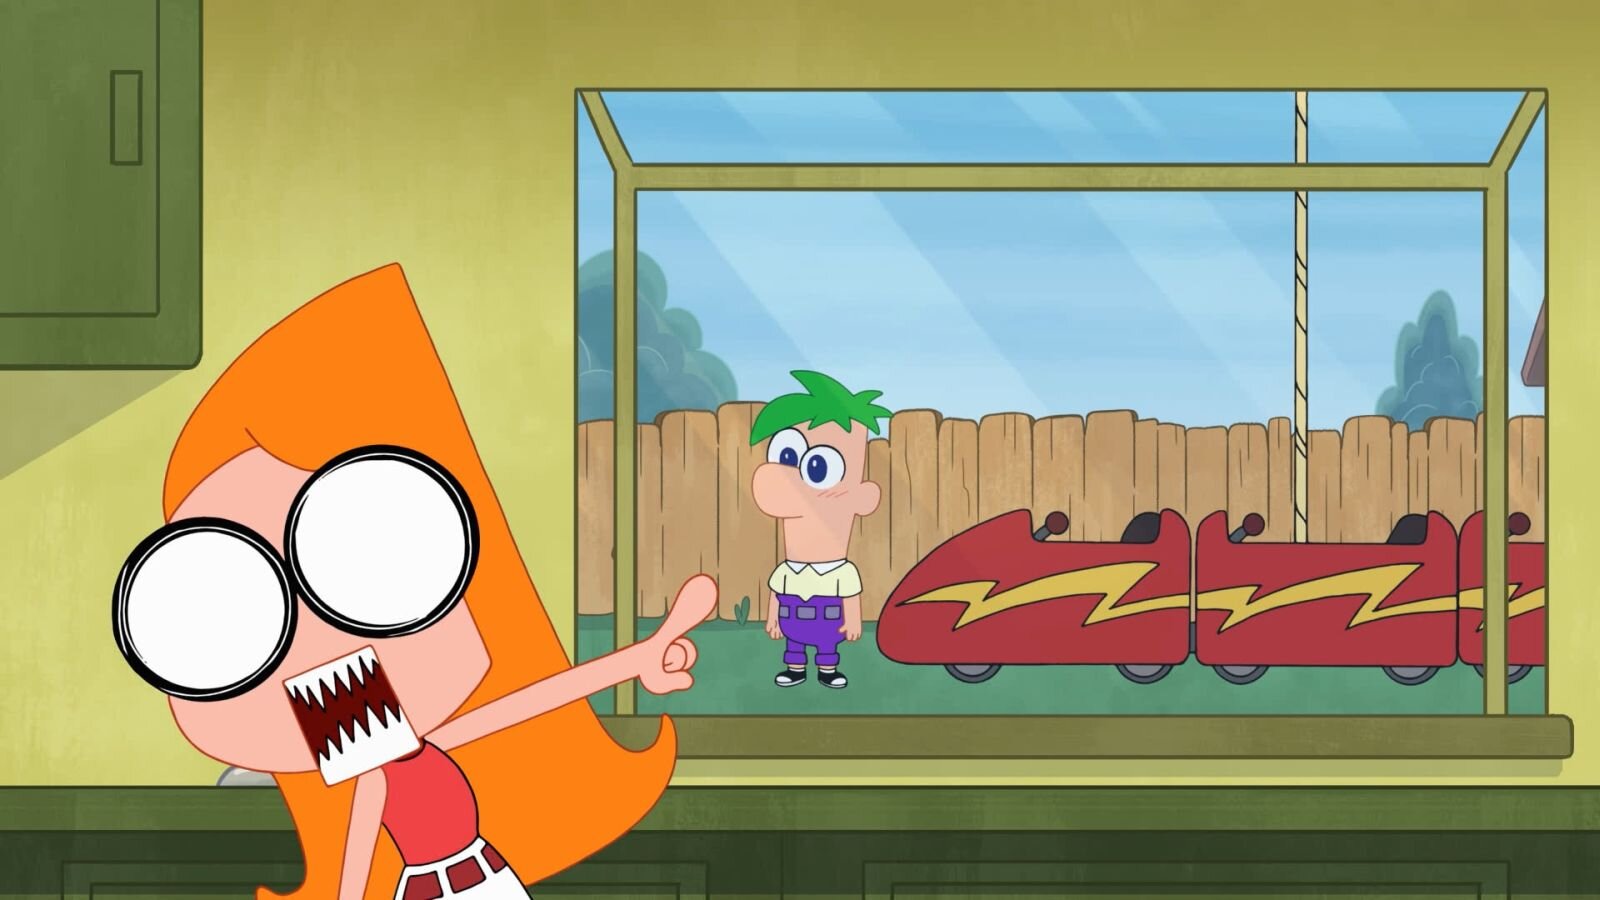 Exclusive: Disney Is Releasing PHINEAS AND FERB Chibi Shorts That Are Too Adorable